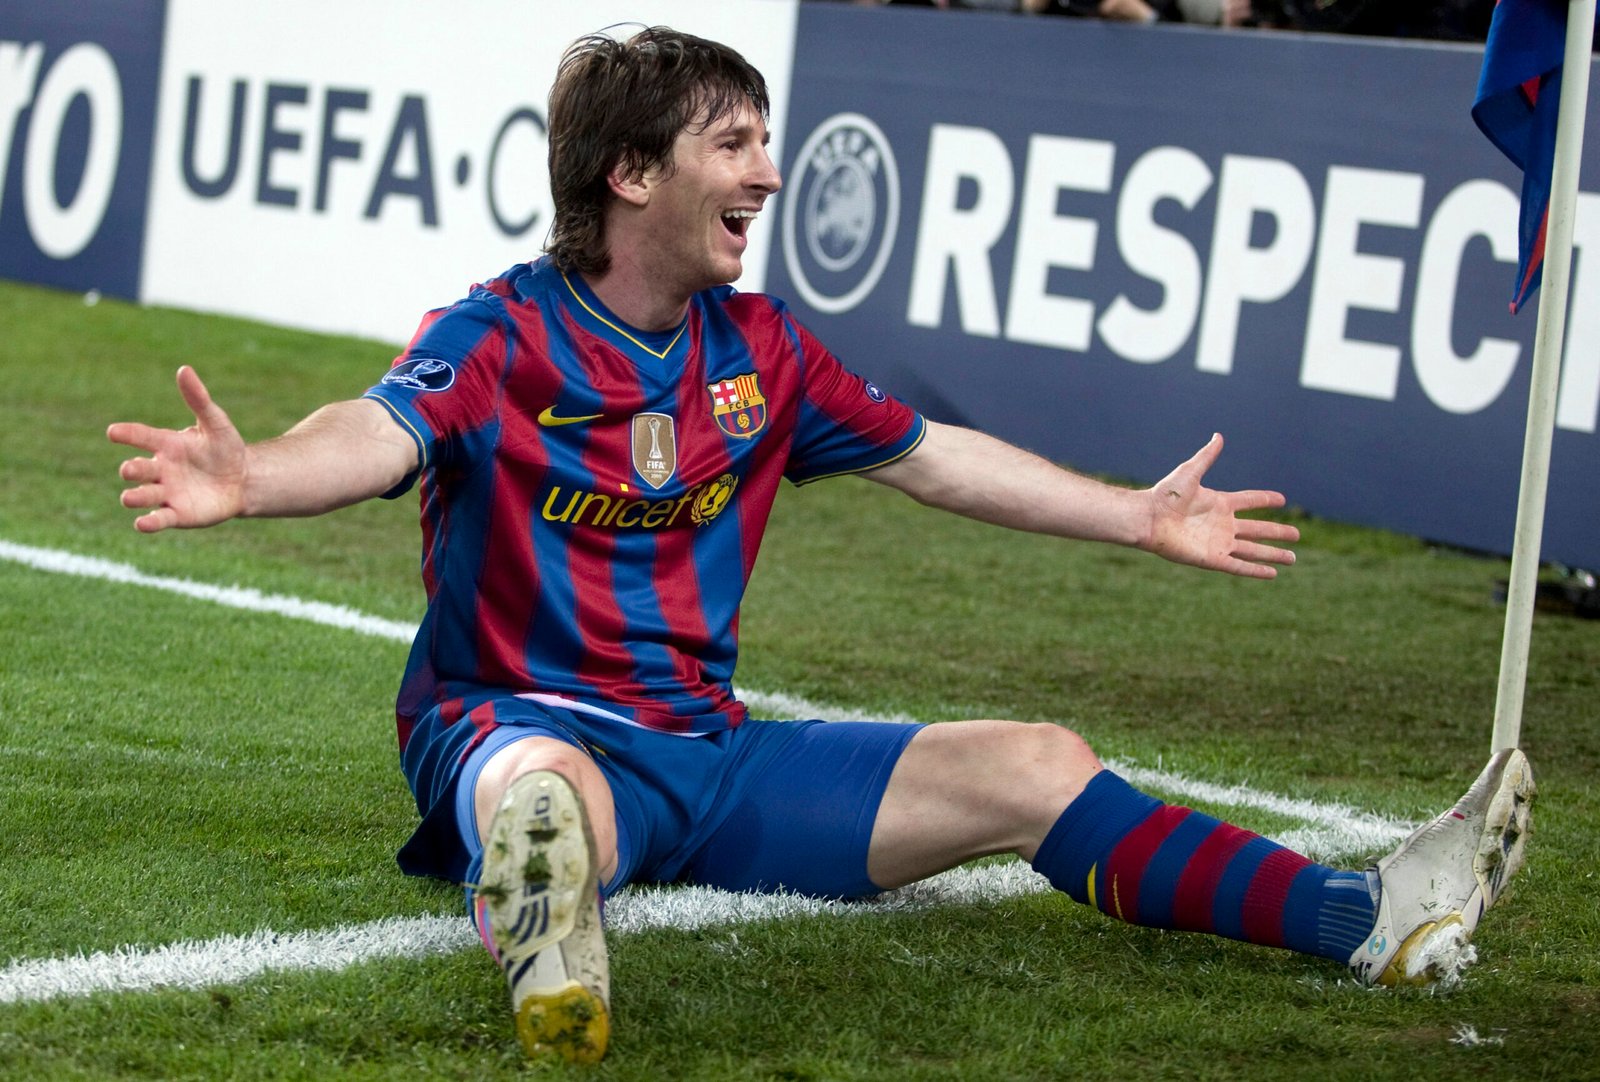 Lionel Messi, the greatest footballer